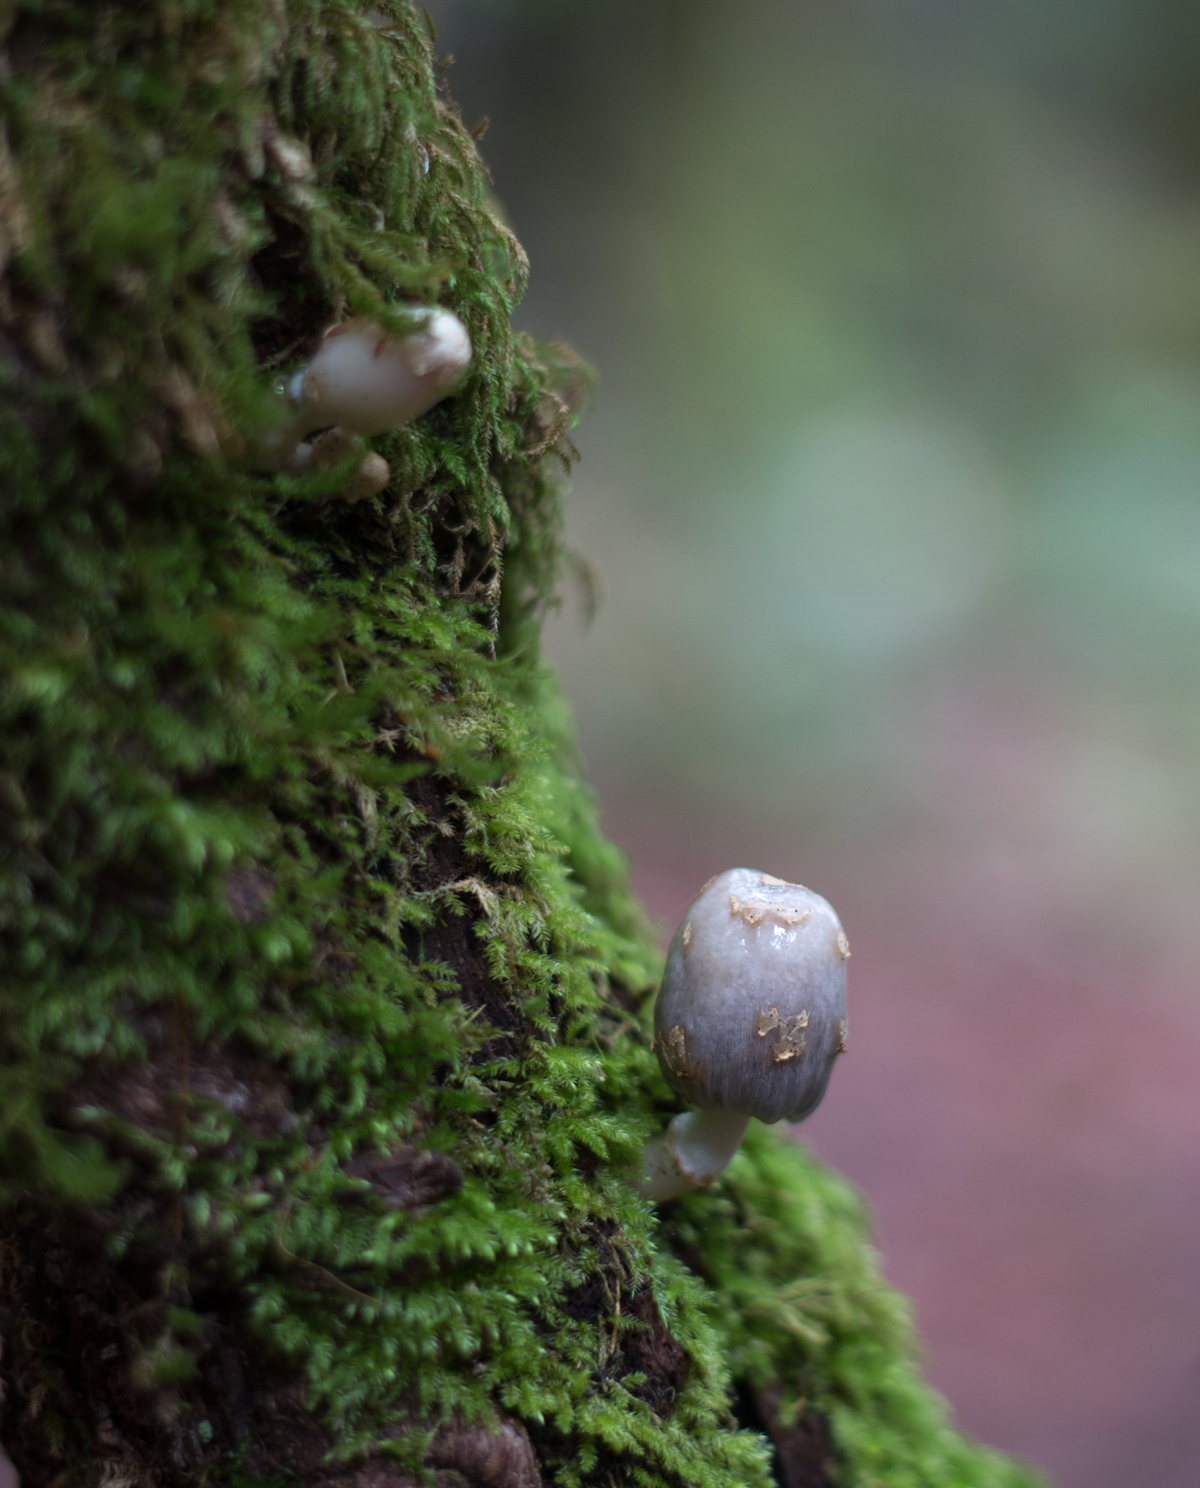 small mushrooms grow on mossy tree along dawn falls trail, baltimore canyon open space preserve, larkspur, marin county, california